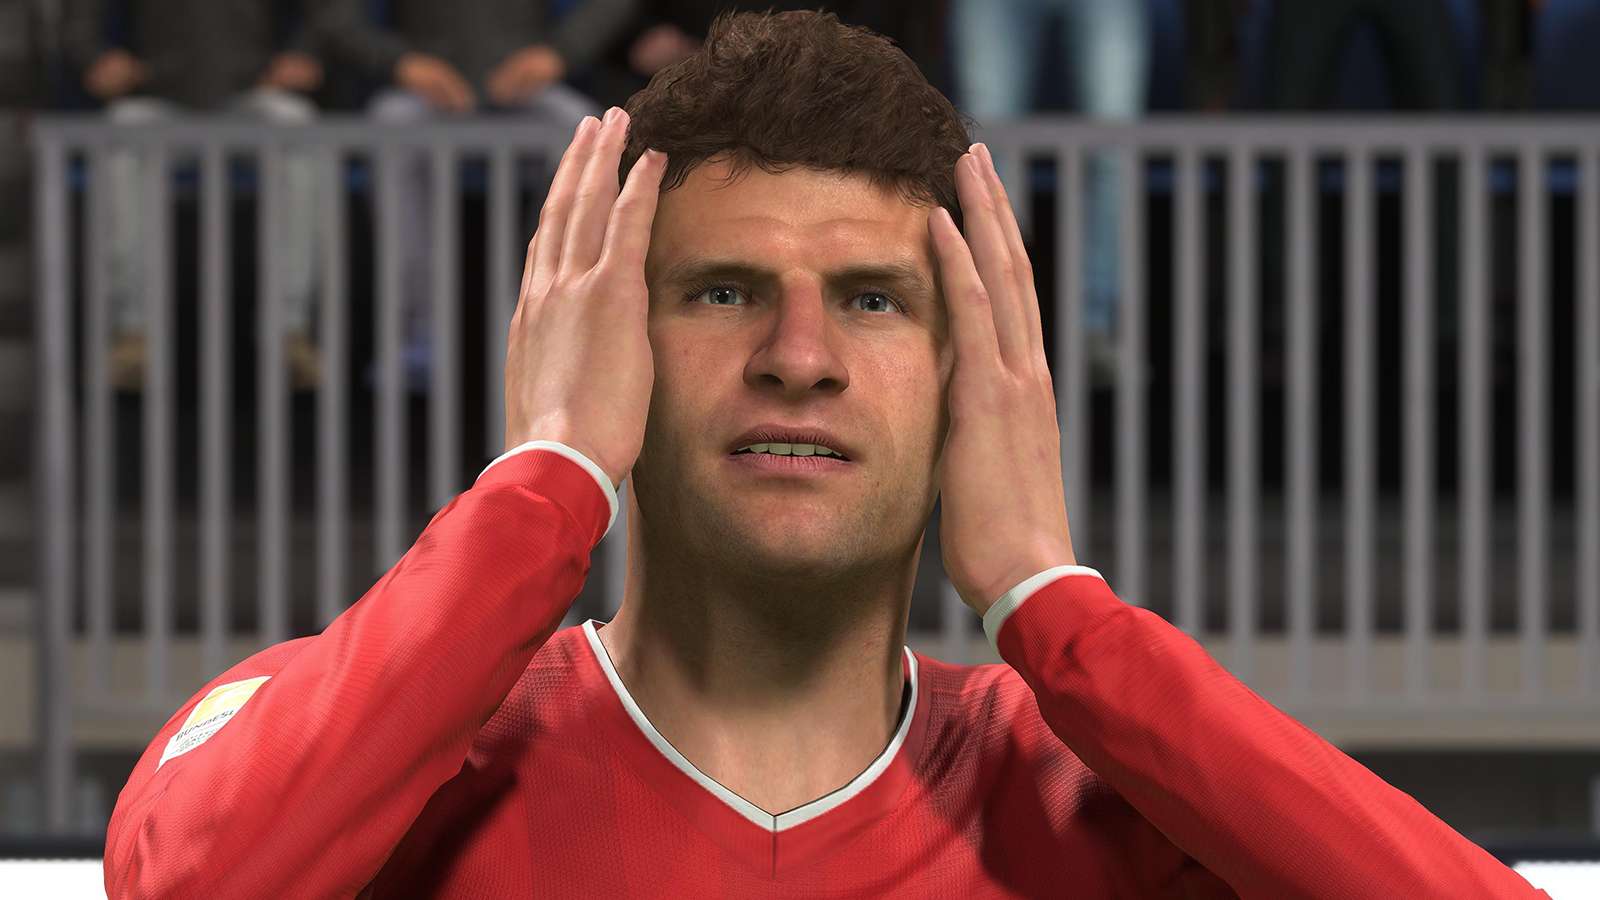 Thomas Muller hands on head in FIFA 21 Ultimate Team after lawsuit scripting.